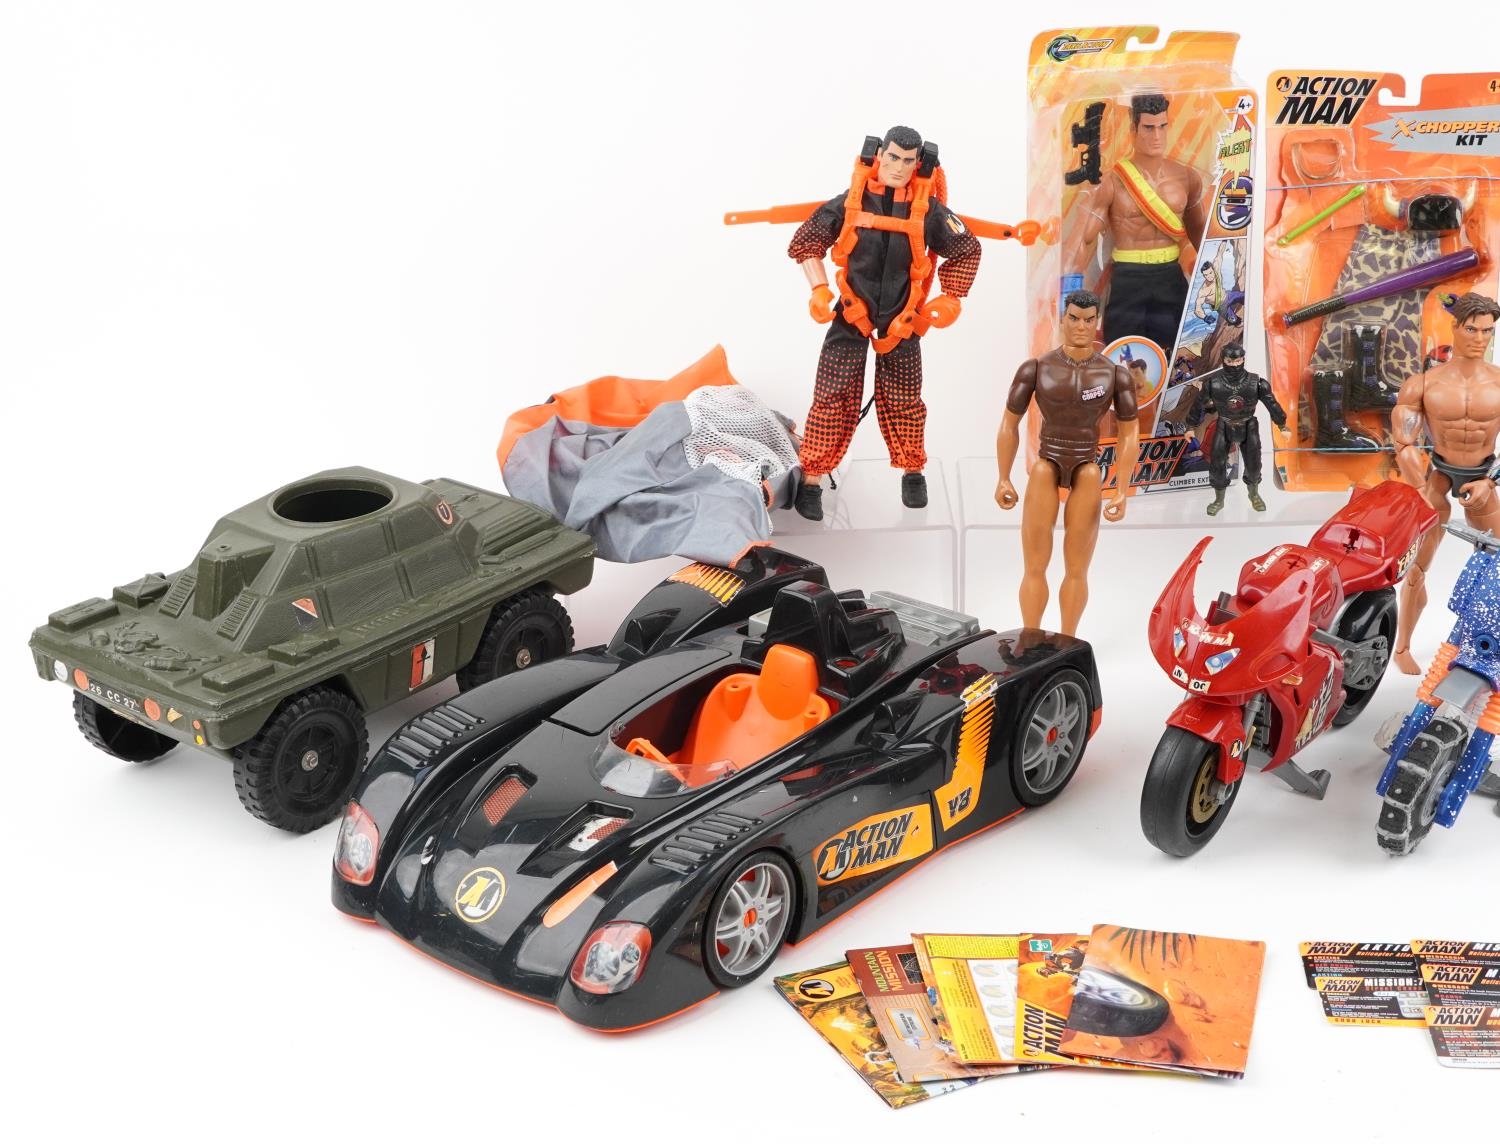 Collection of vintage and later Action Man toys including action figures and vehicles - Image 2 of 3